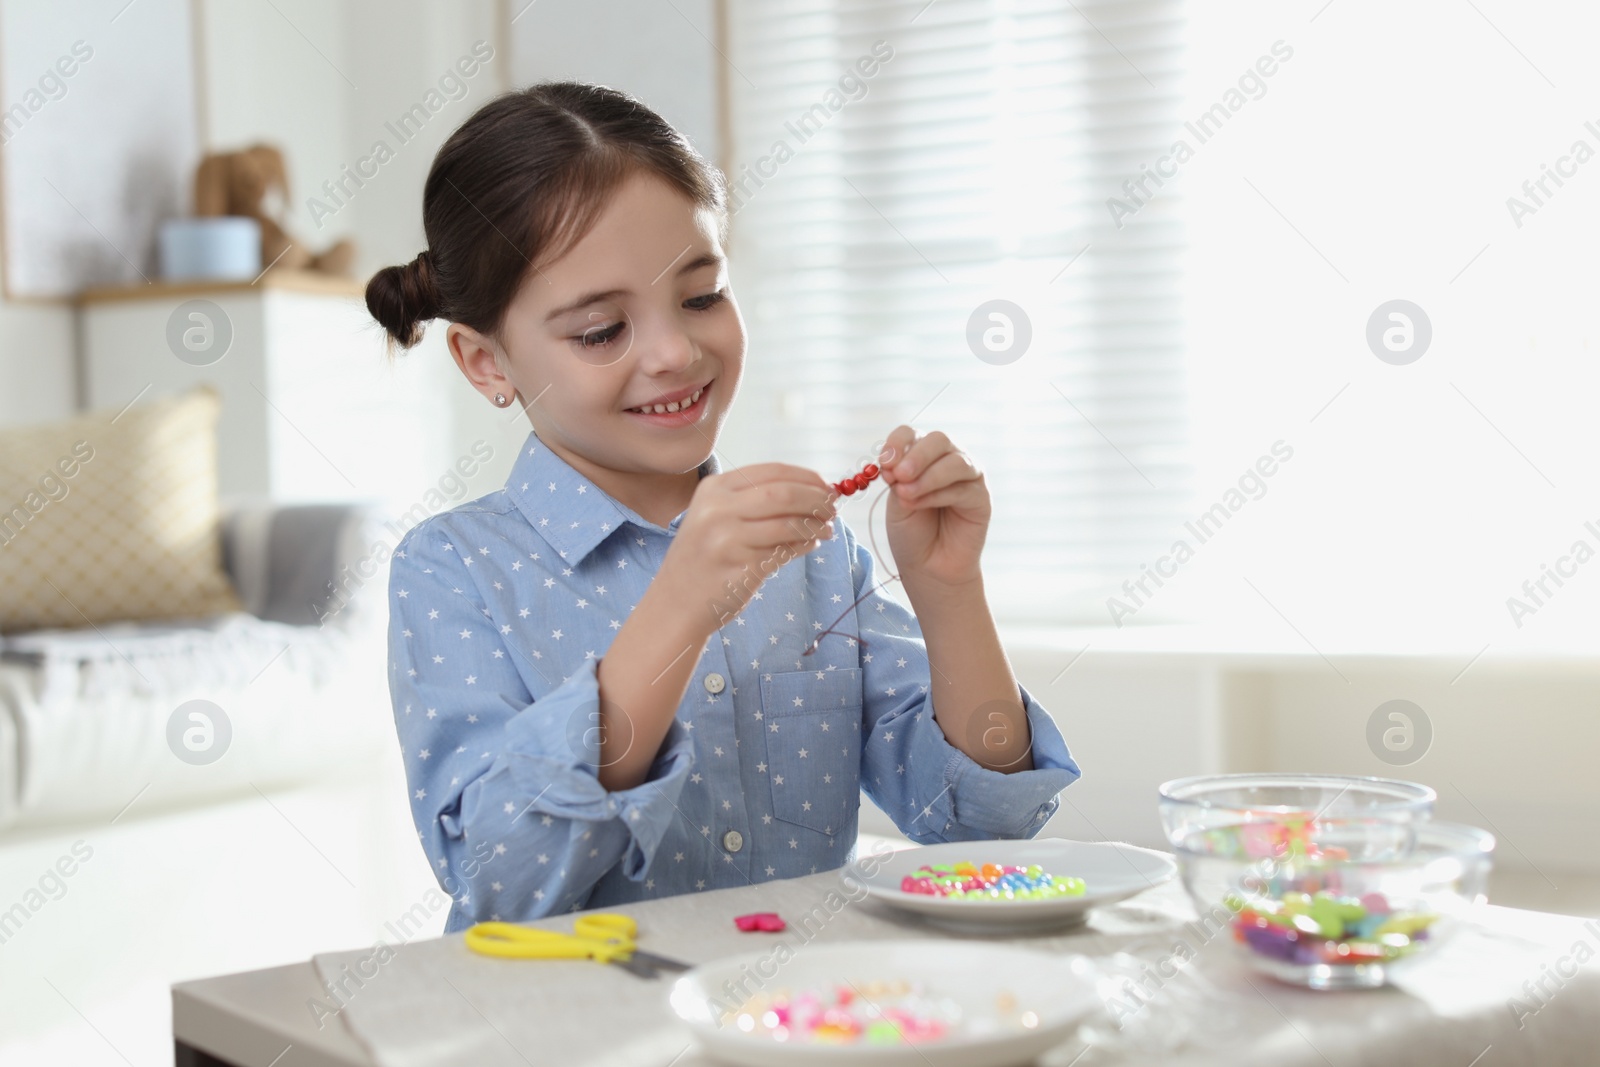 Photo of Little girl making accessory with beads at table indoors. Creative hobby